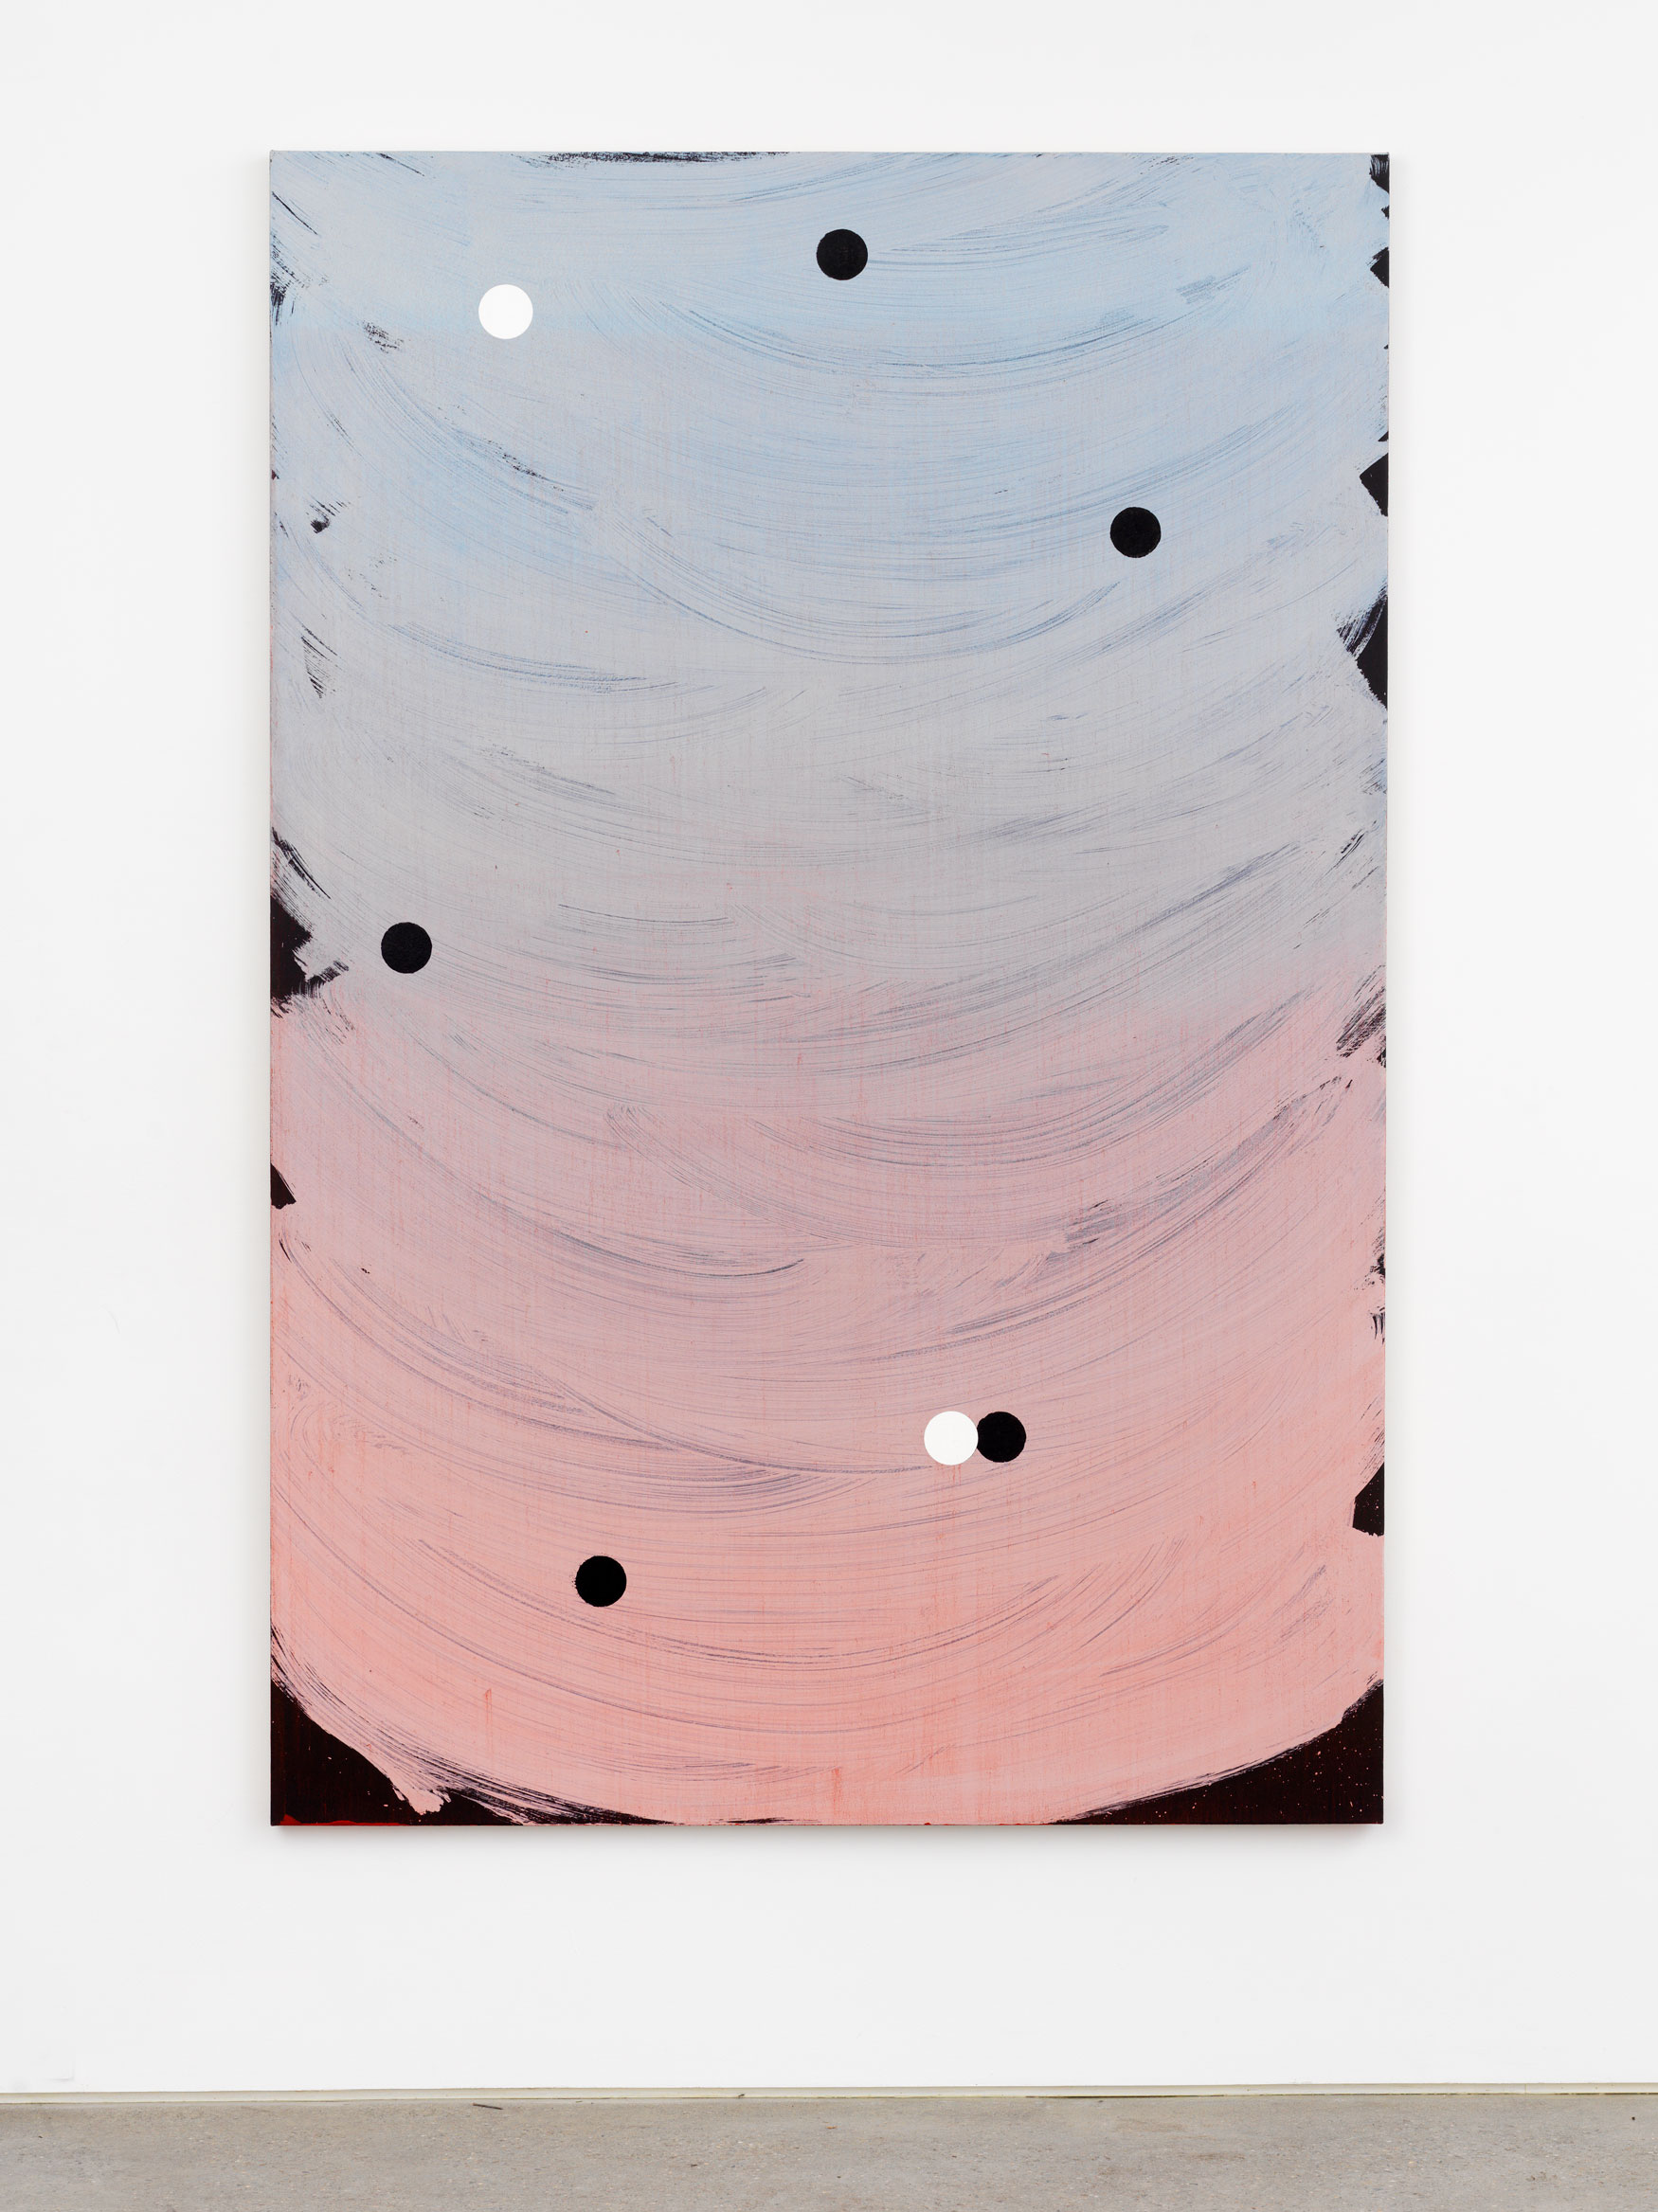 Alex Kwartler, Untitled (dusk), 2019, acrylic and oil on canvas, 72h x 48w in.